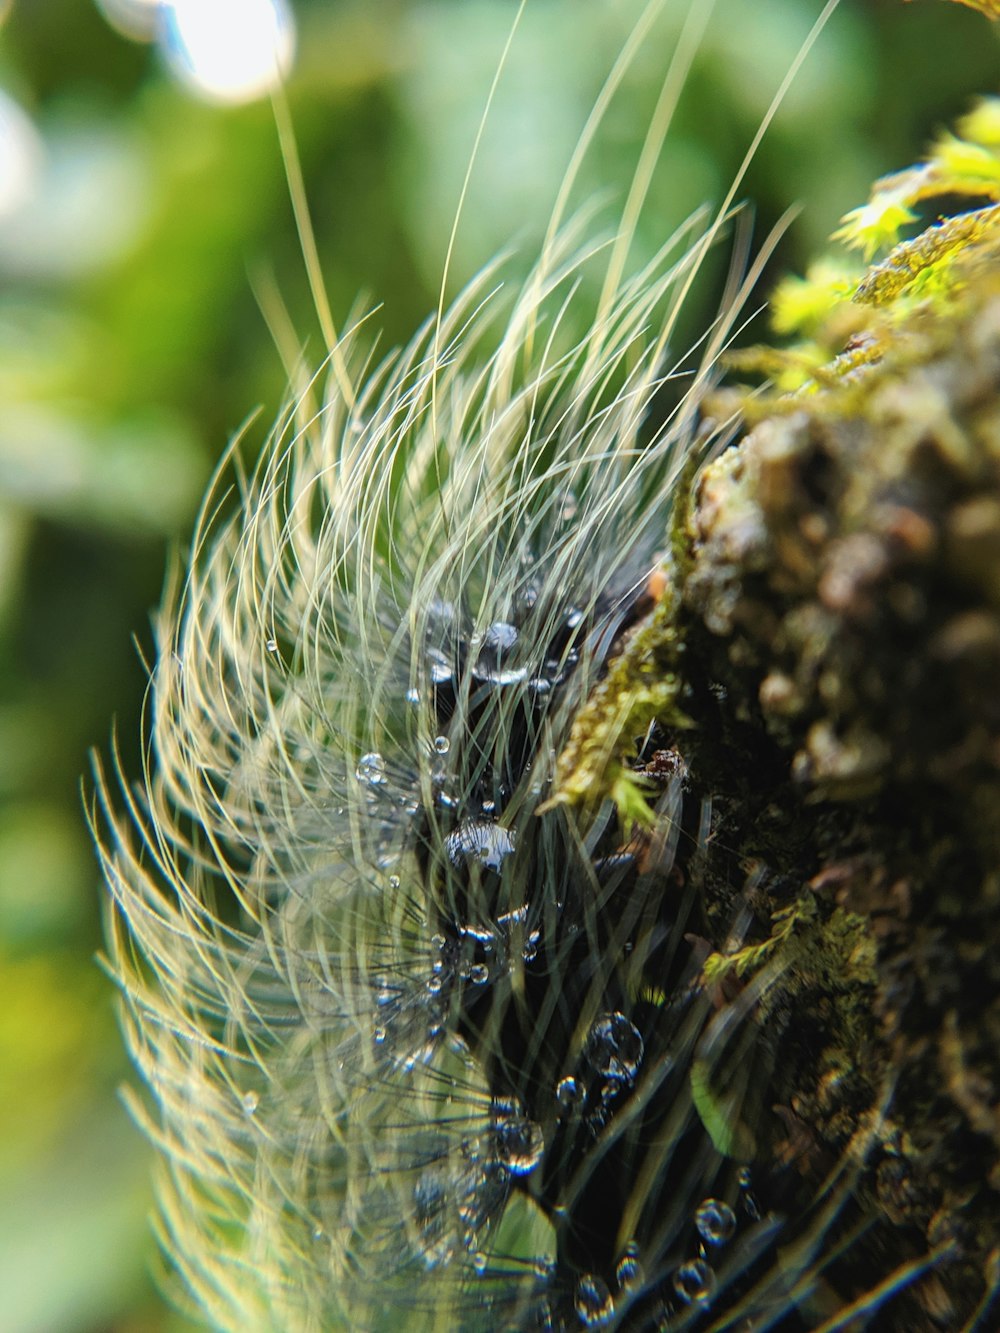 macrophotography of woolly caterpillar